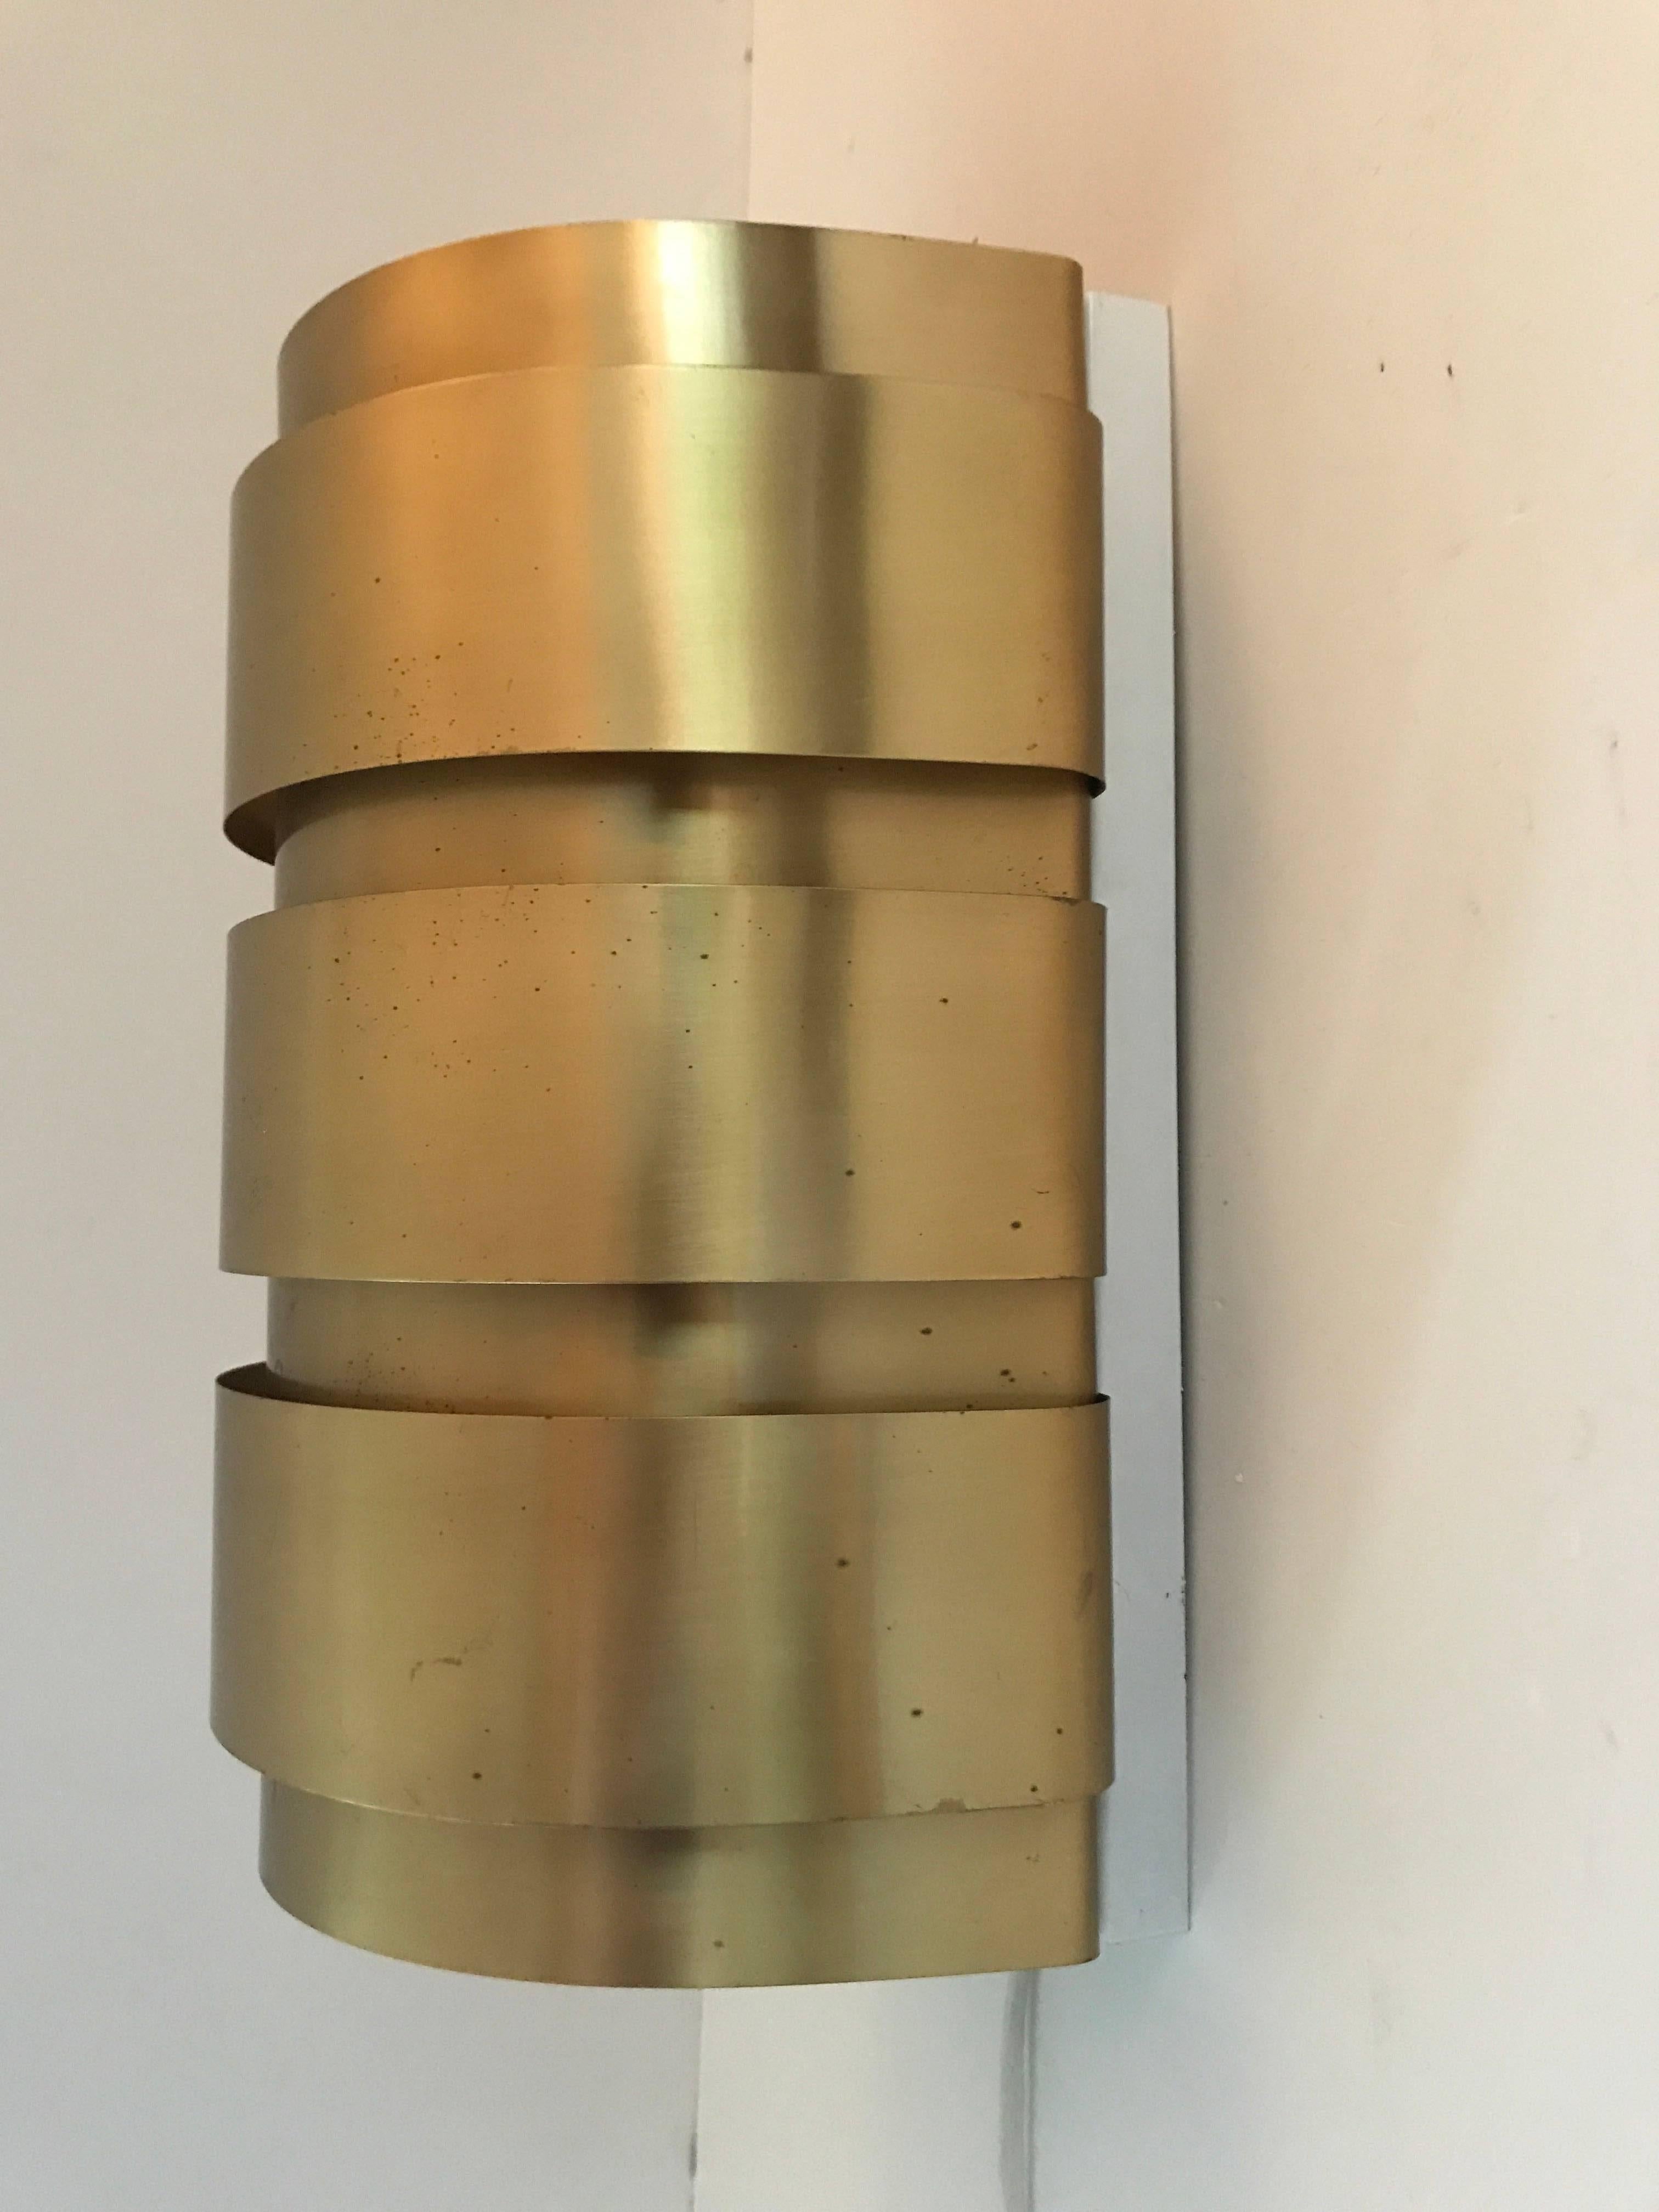 Pair of Swedish Hans-Agne Jakobsson V 155 brass wall sconces wall lamps, 1960.
They are in top condition without any damages or flaws. They measure 28cm in height and 17cm in width.
The electric installations in all lamps sold by us are thoroughly